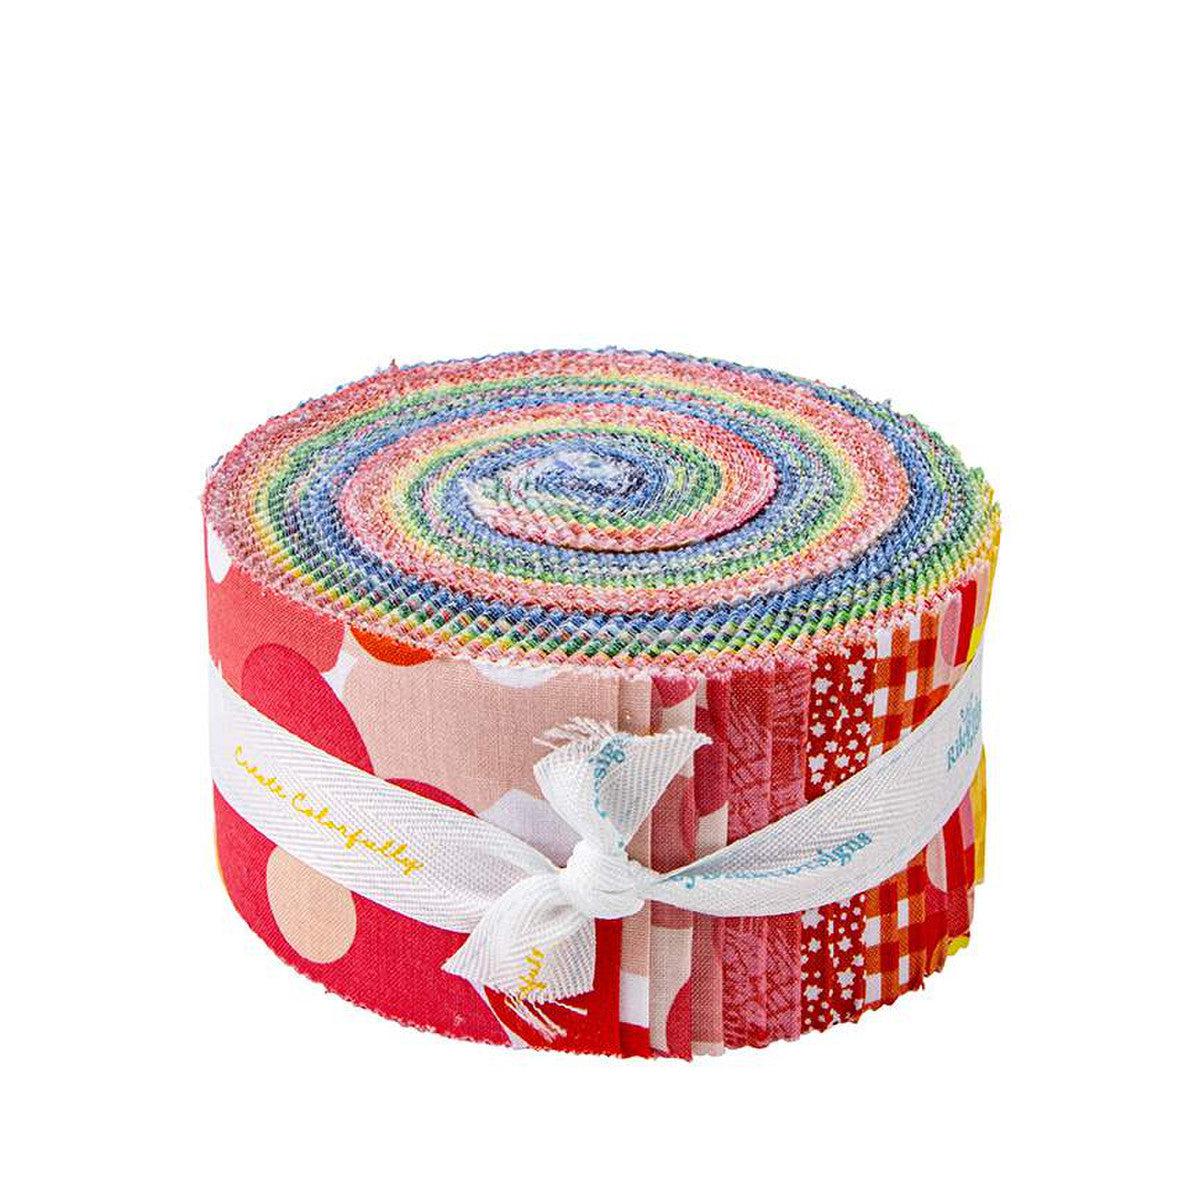 Copacetic 2 1/2" Jelly Roll-Riley Blake Fabrics-My Favorite Quilt Store